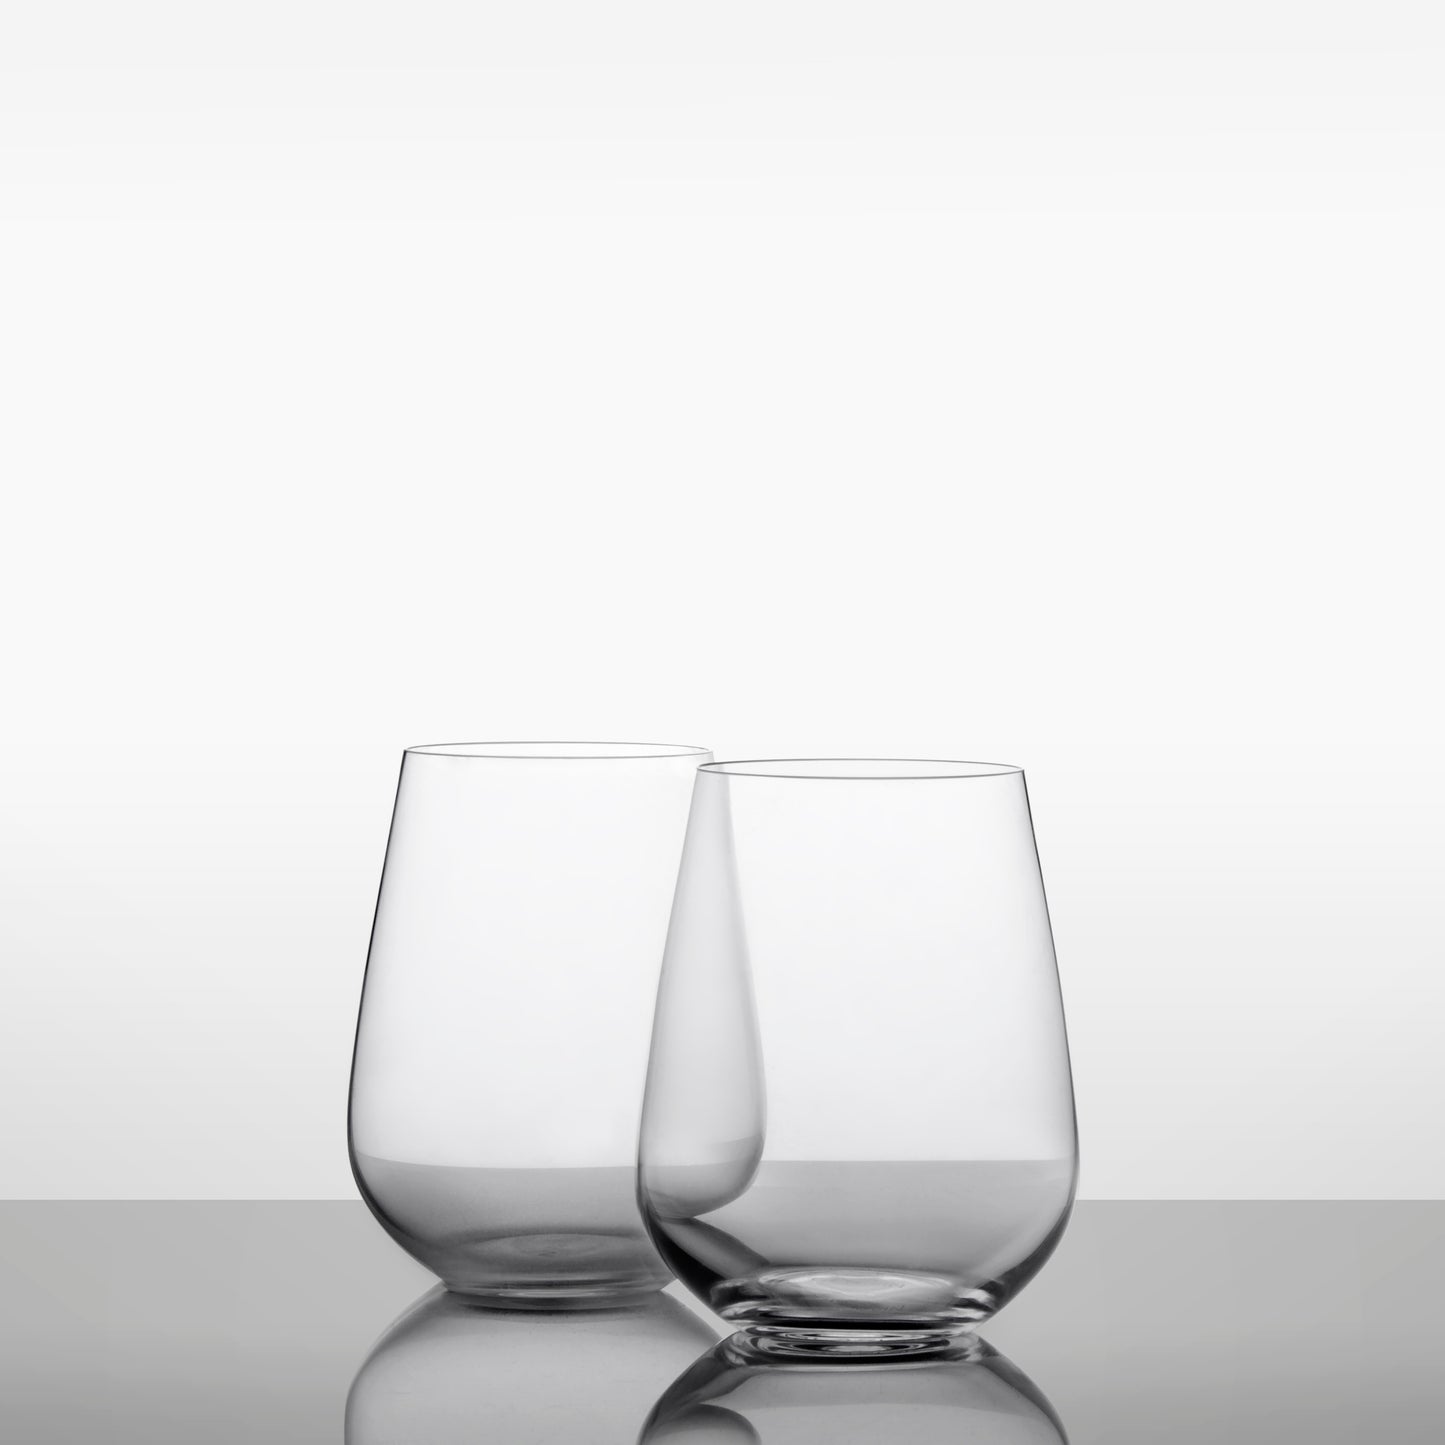 The Stemless